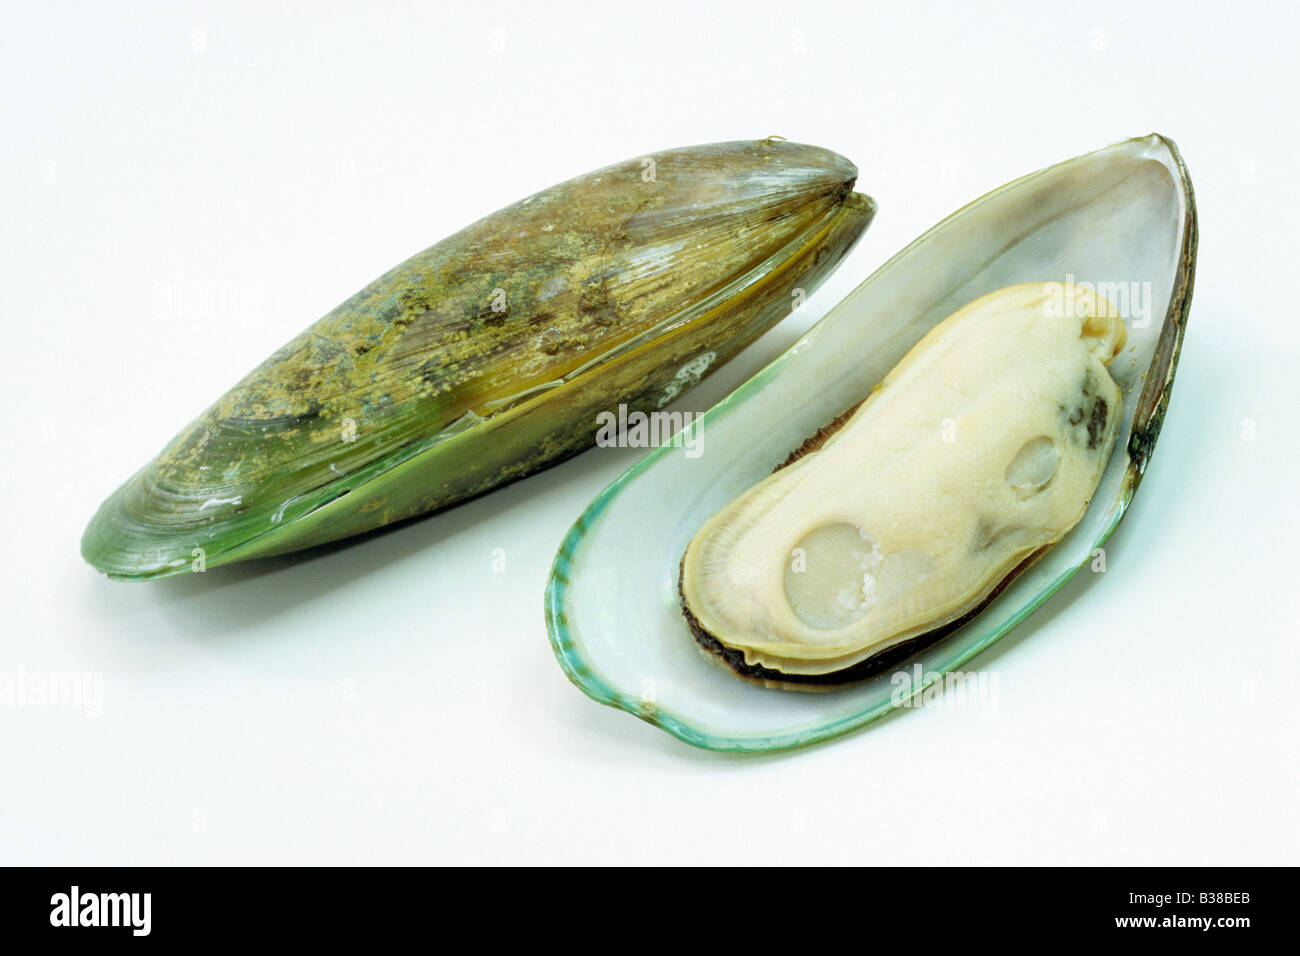 Greenshell Mussel, New Zealand Mussel, Channel Mussel (Perna canaliculus), closed and opened, studio picture Stock Photo